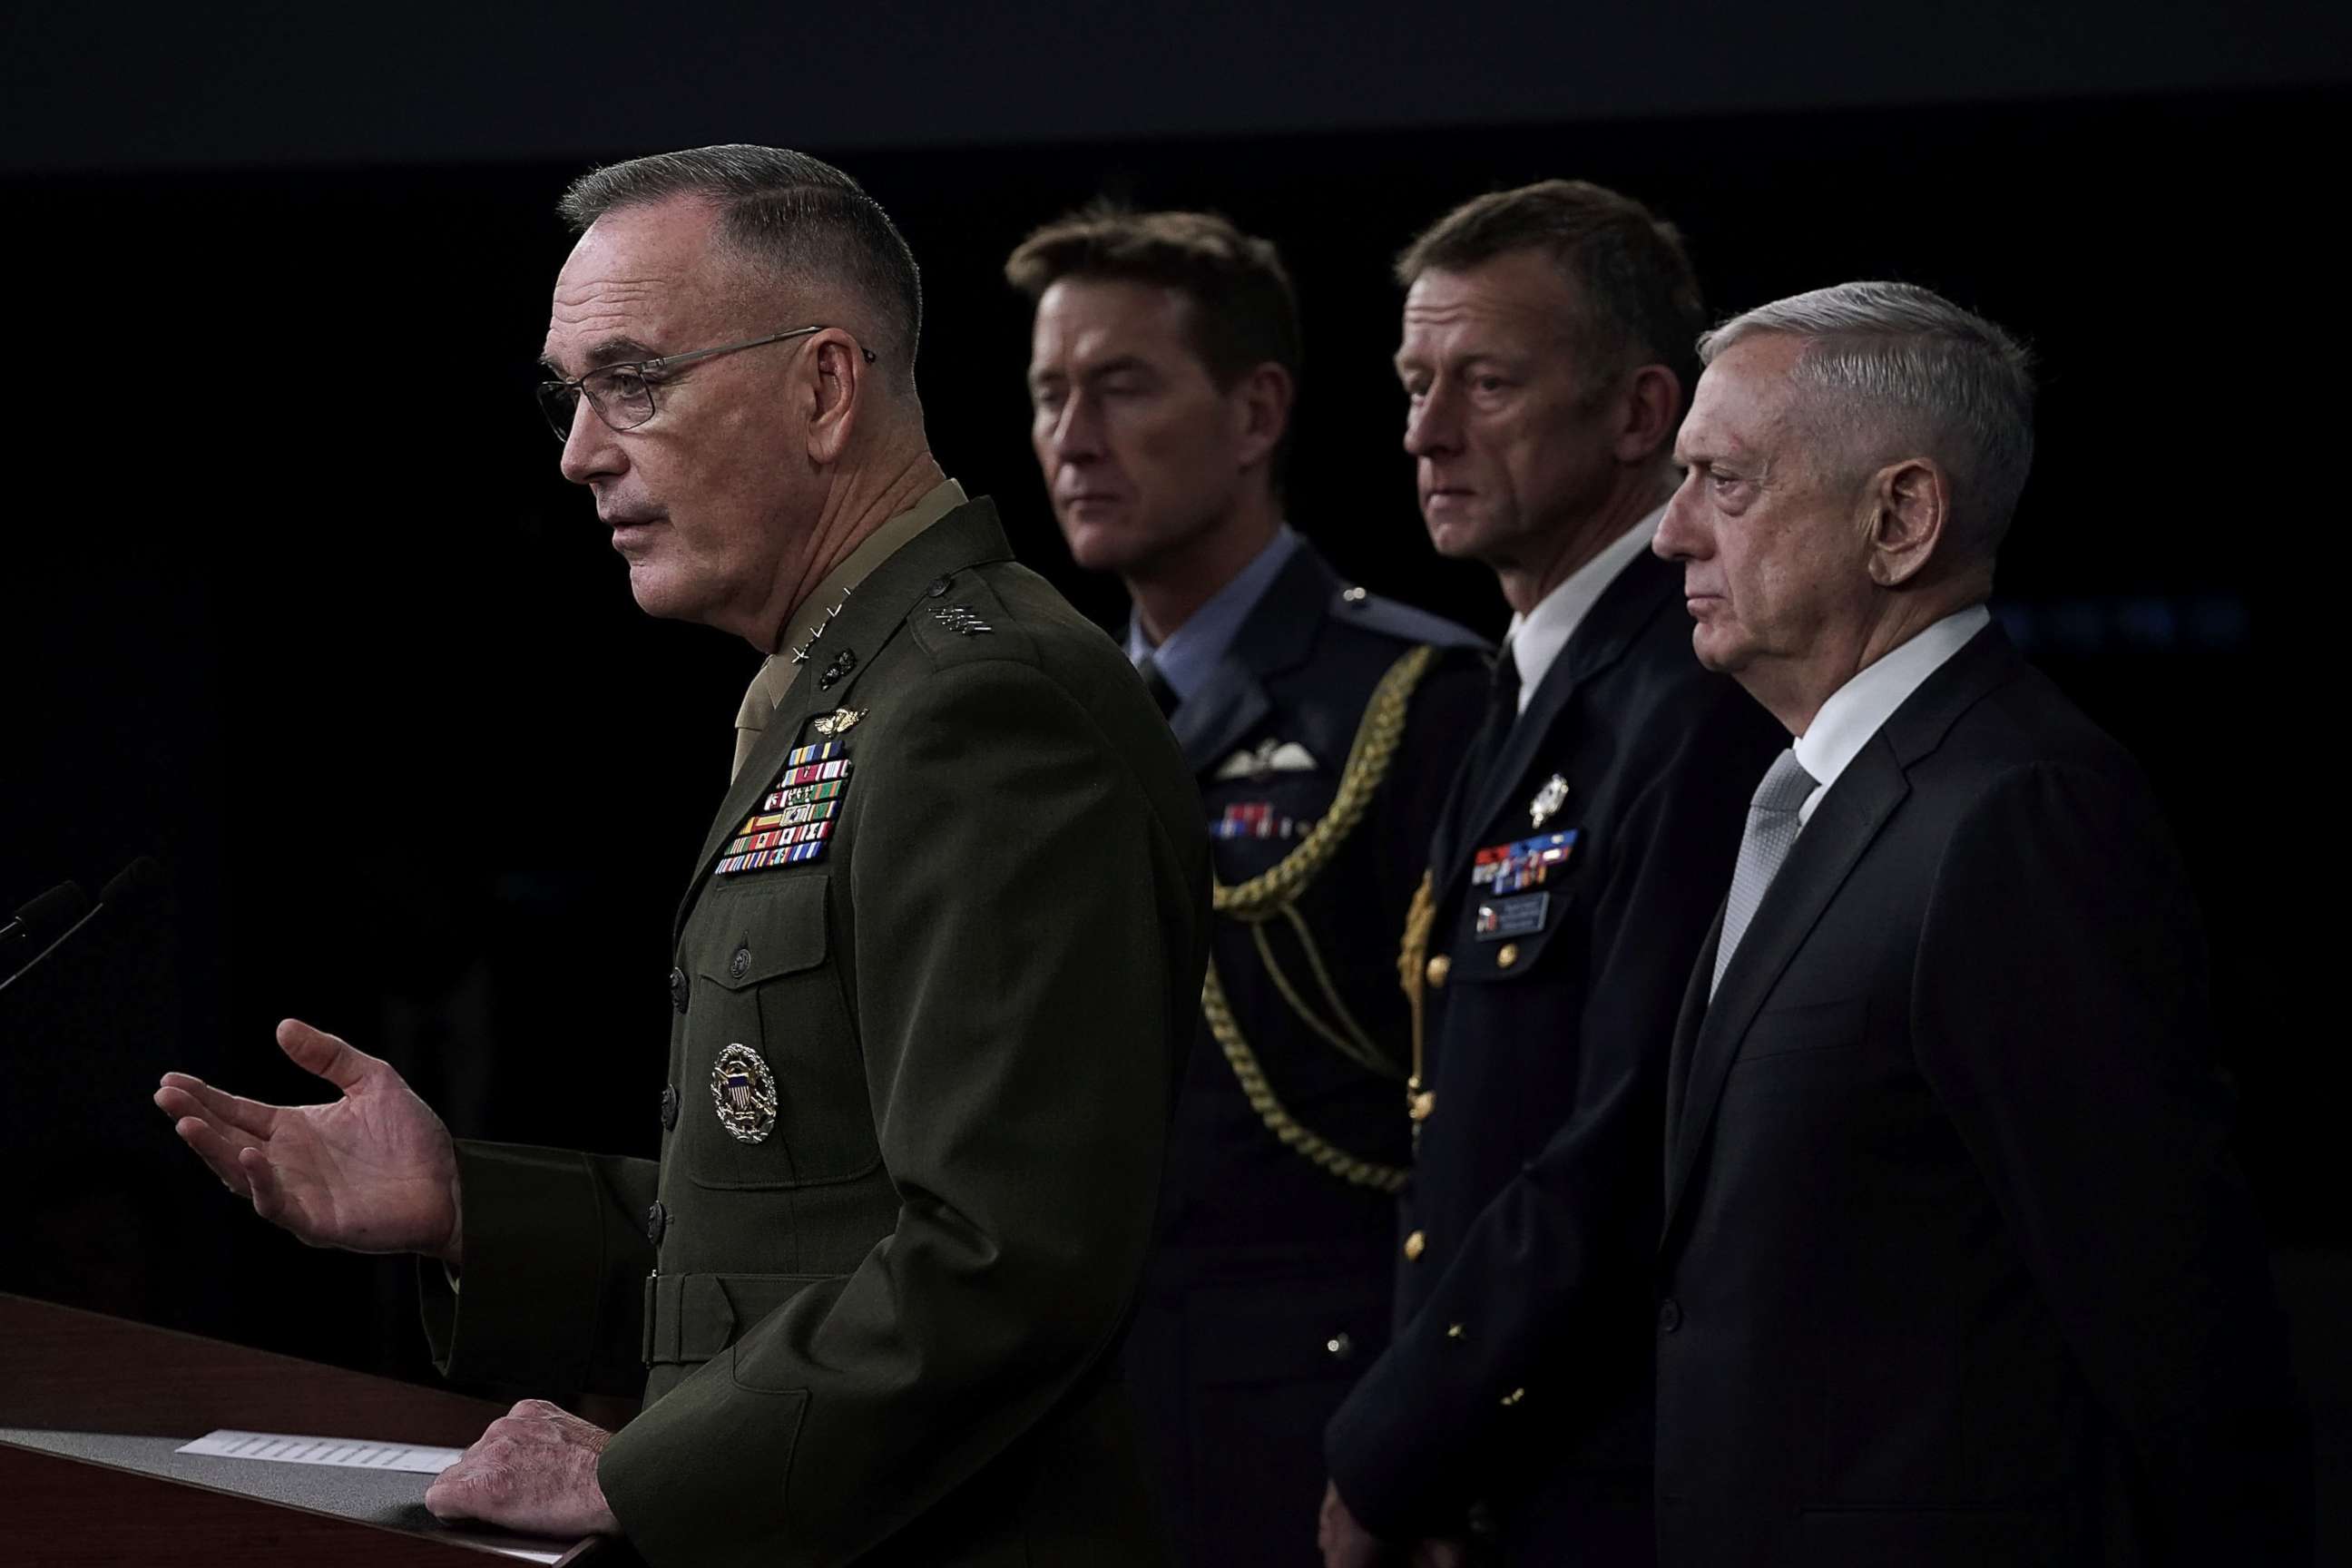 PHOTO: Chairman of the Joint Chiefs of Staff Gen. Joseph Dunford, left, and Defense Secretary Jim Mattis, right, brief members of the media on Syria at the Pentagon, April 13, 2018.